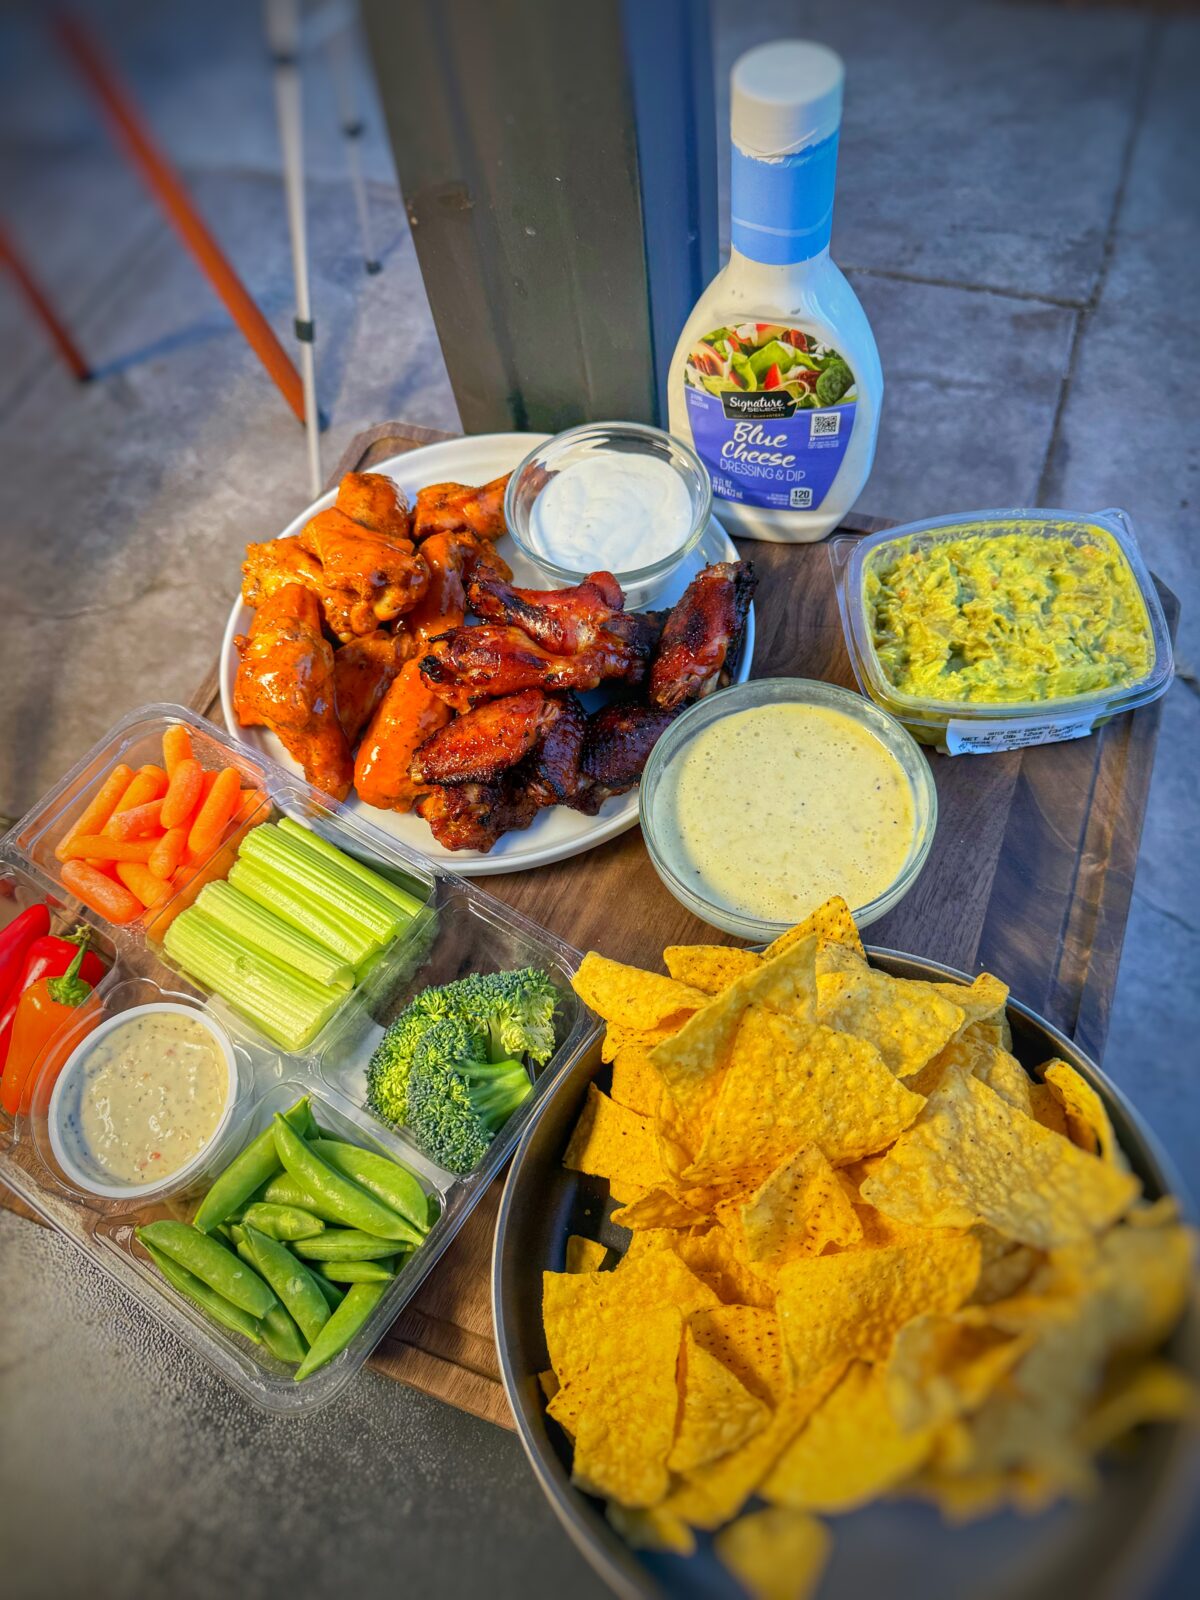 Wings, veggies, guac and queso all ready for the big game.